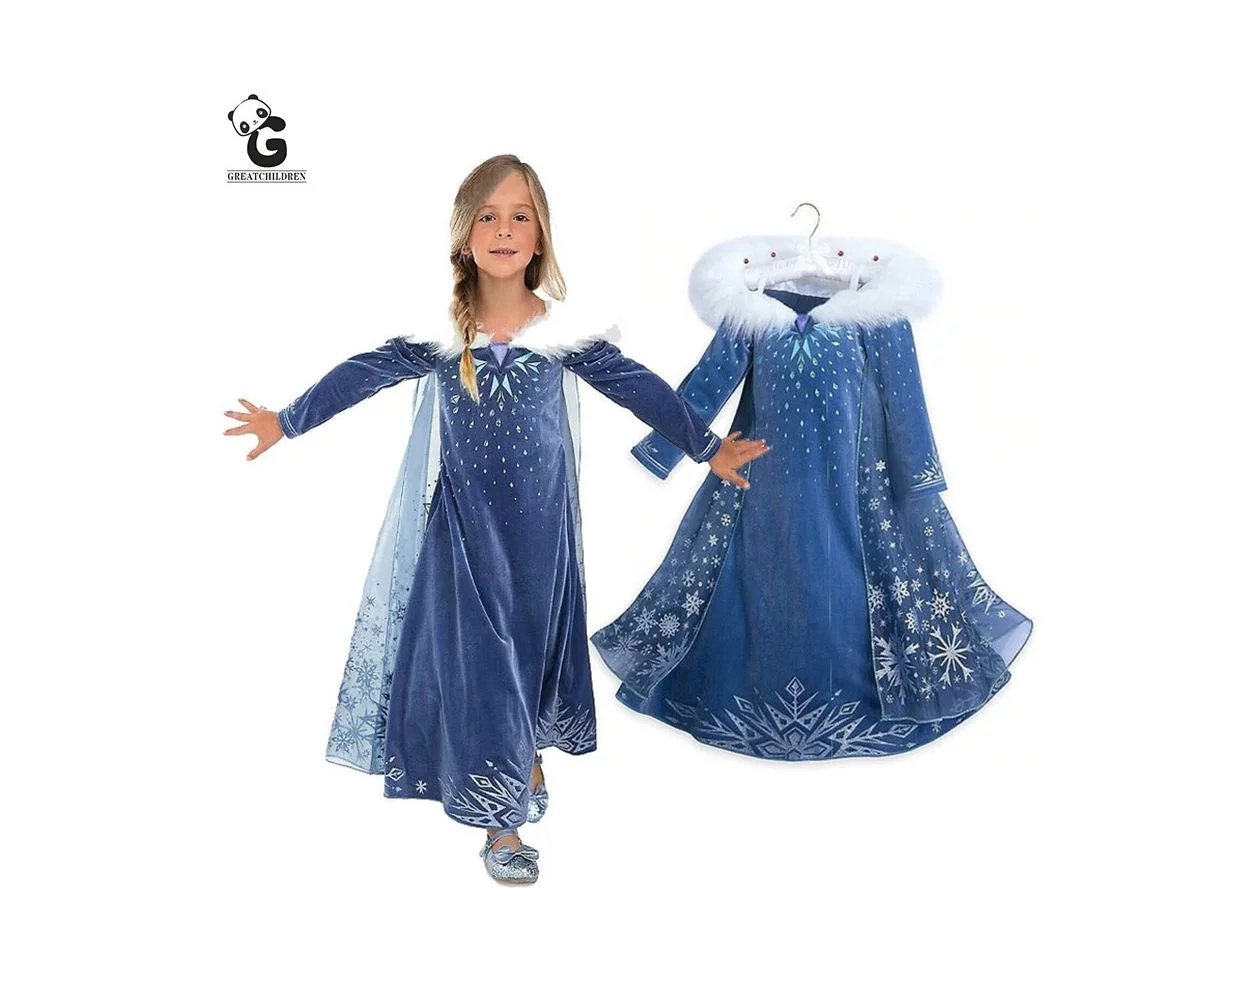 Frozen 2 inspired Snow Elsa Princess Costume Party Cosplay Anna Dress for  Girls | eBay